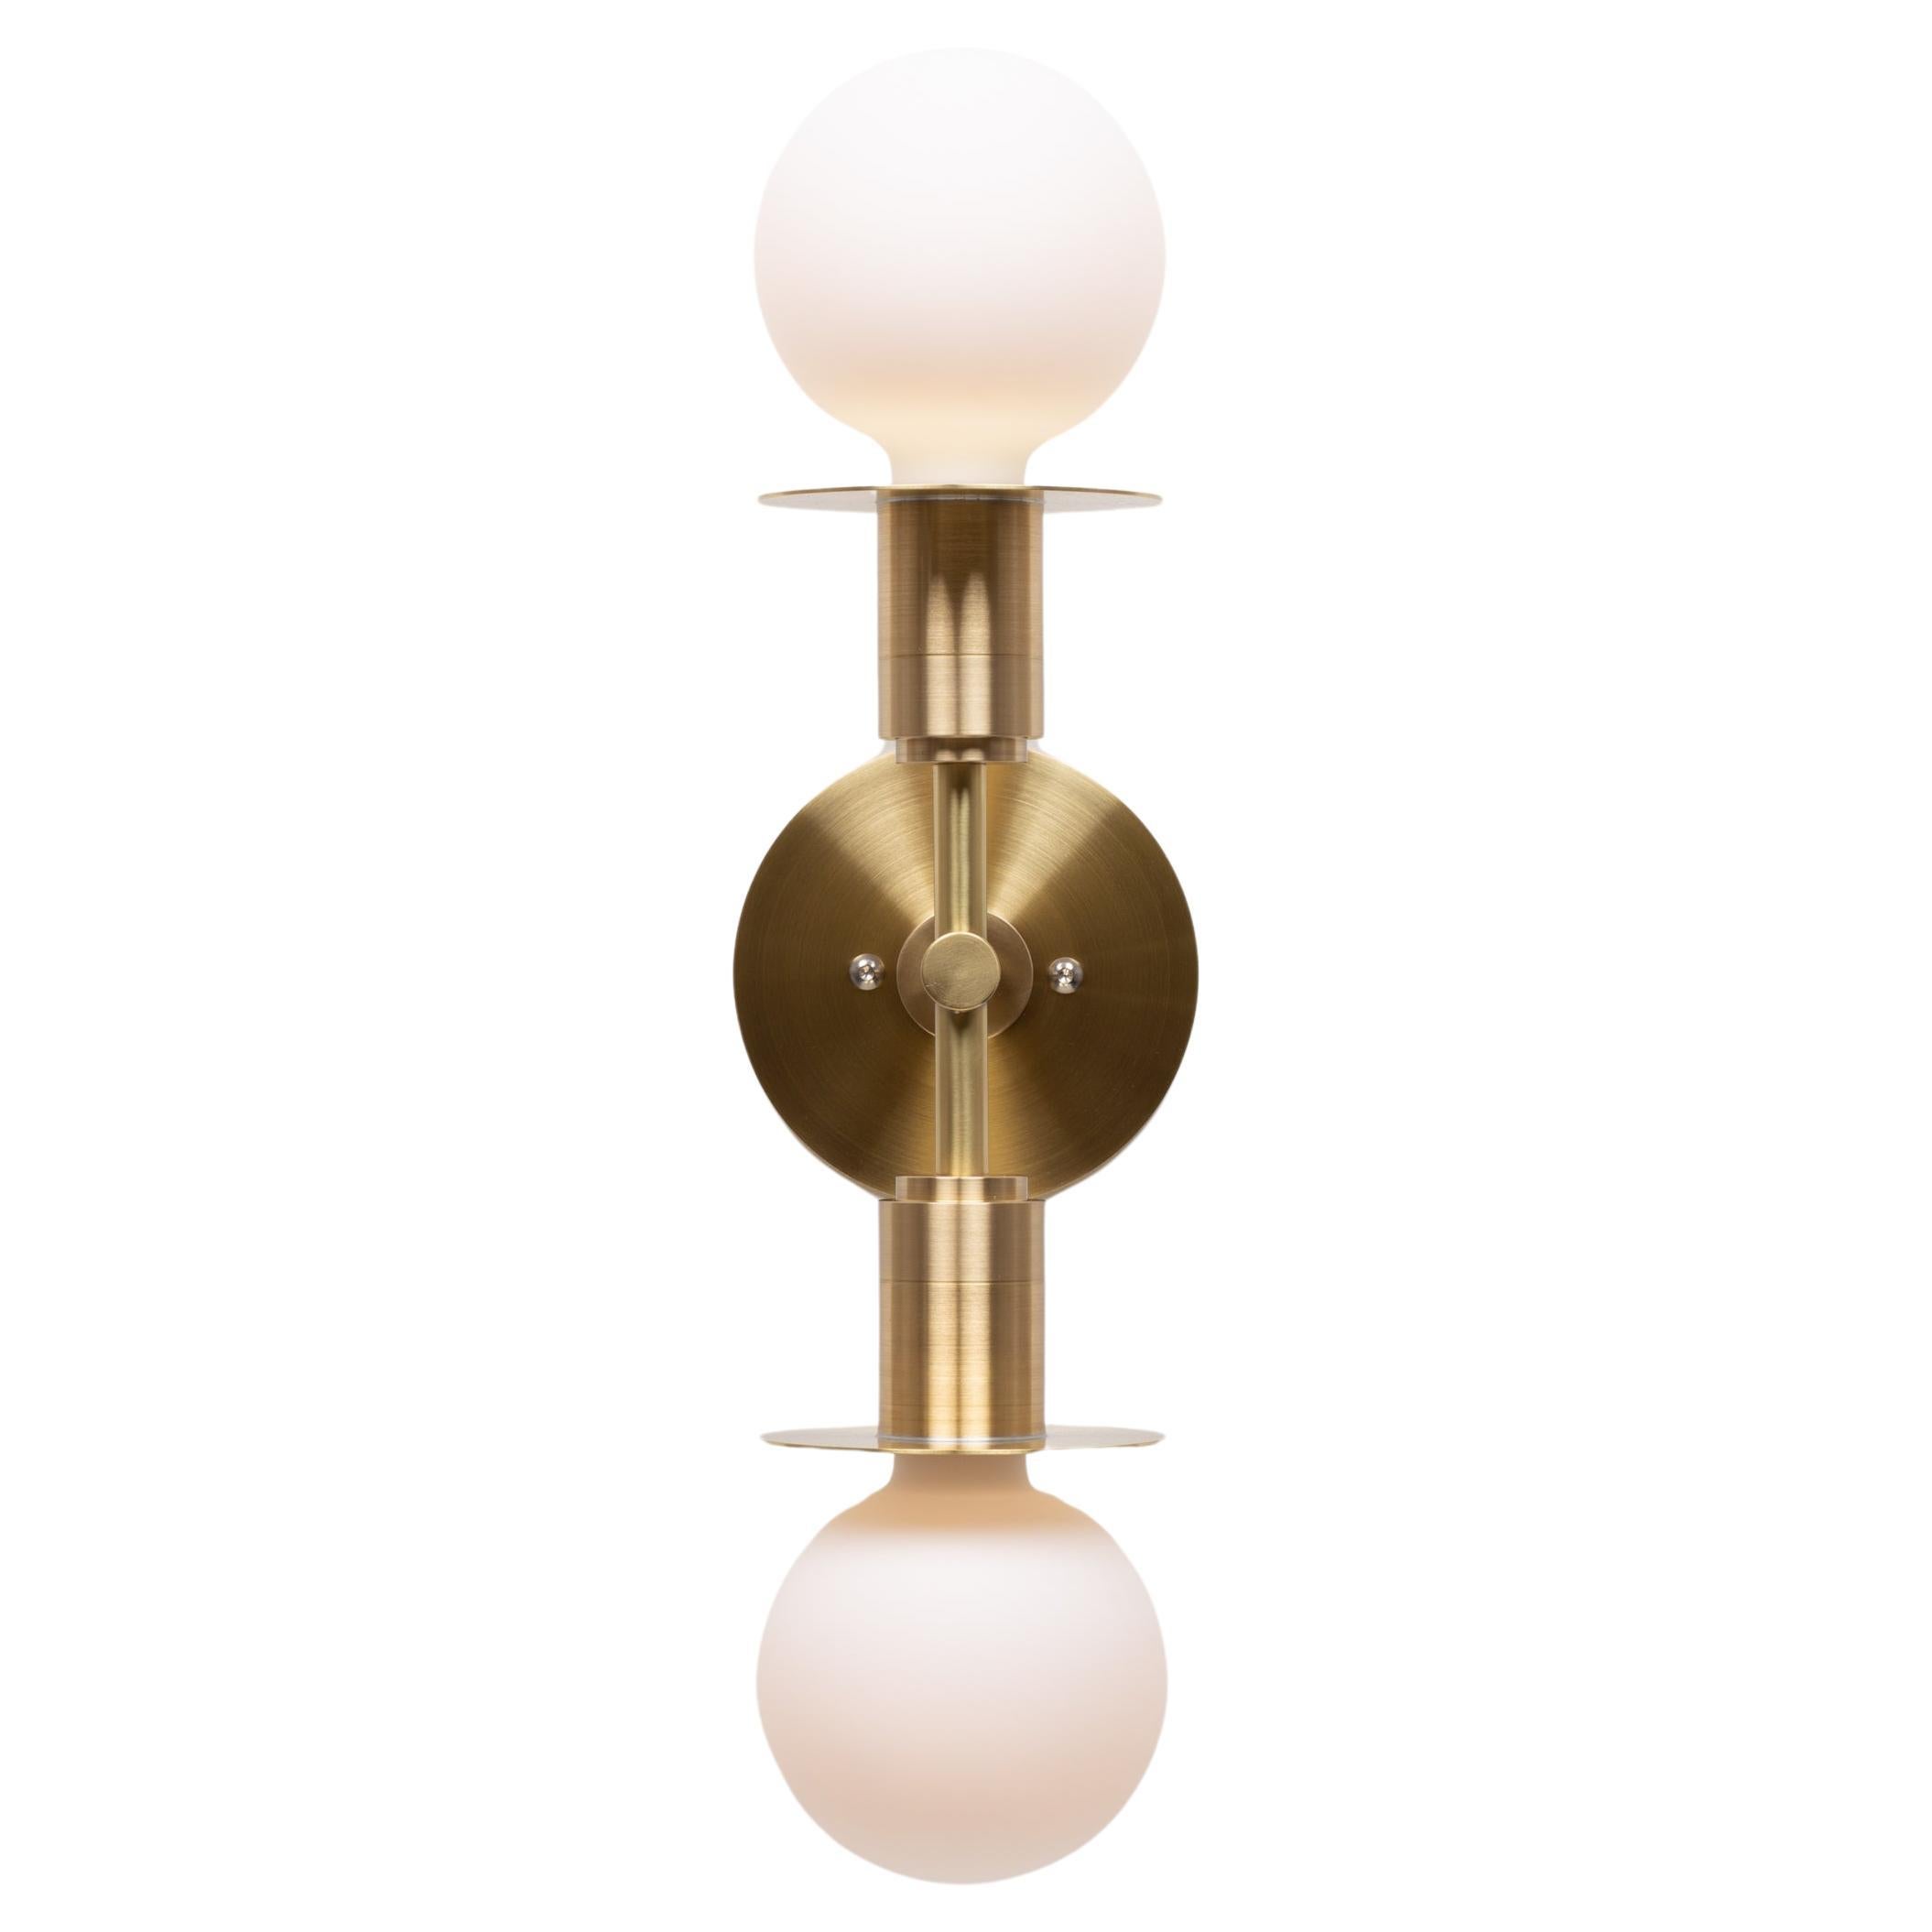 Double Sphere Disc Flush Mount Wall Light Sconce by Lights of London For Sale